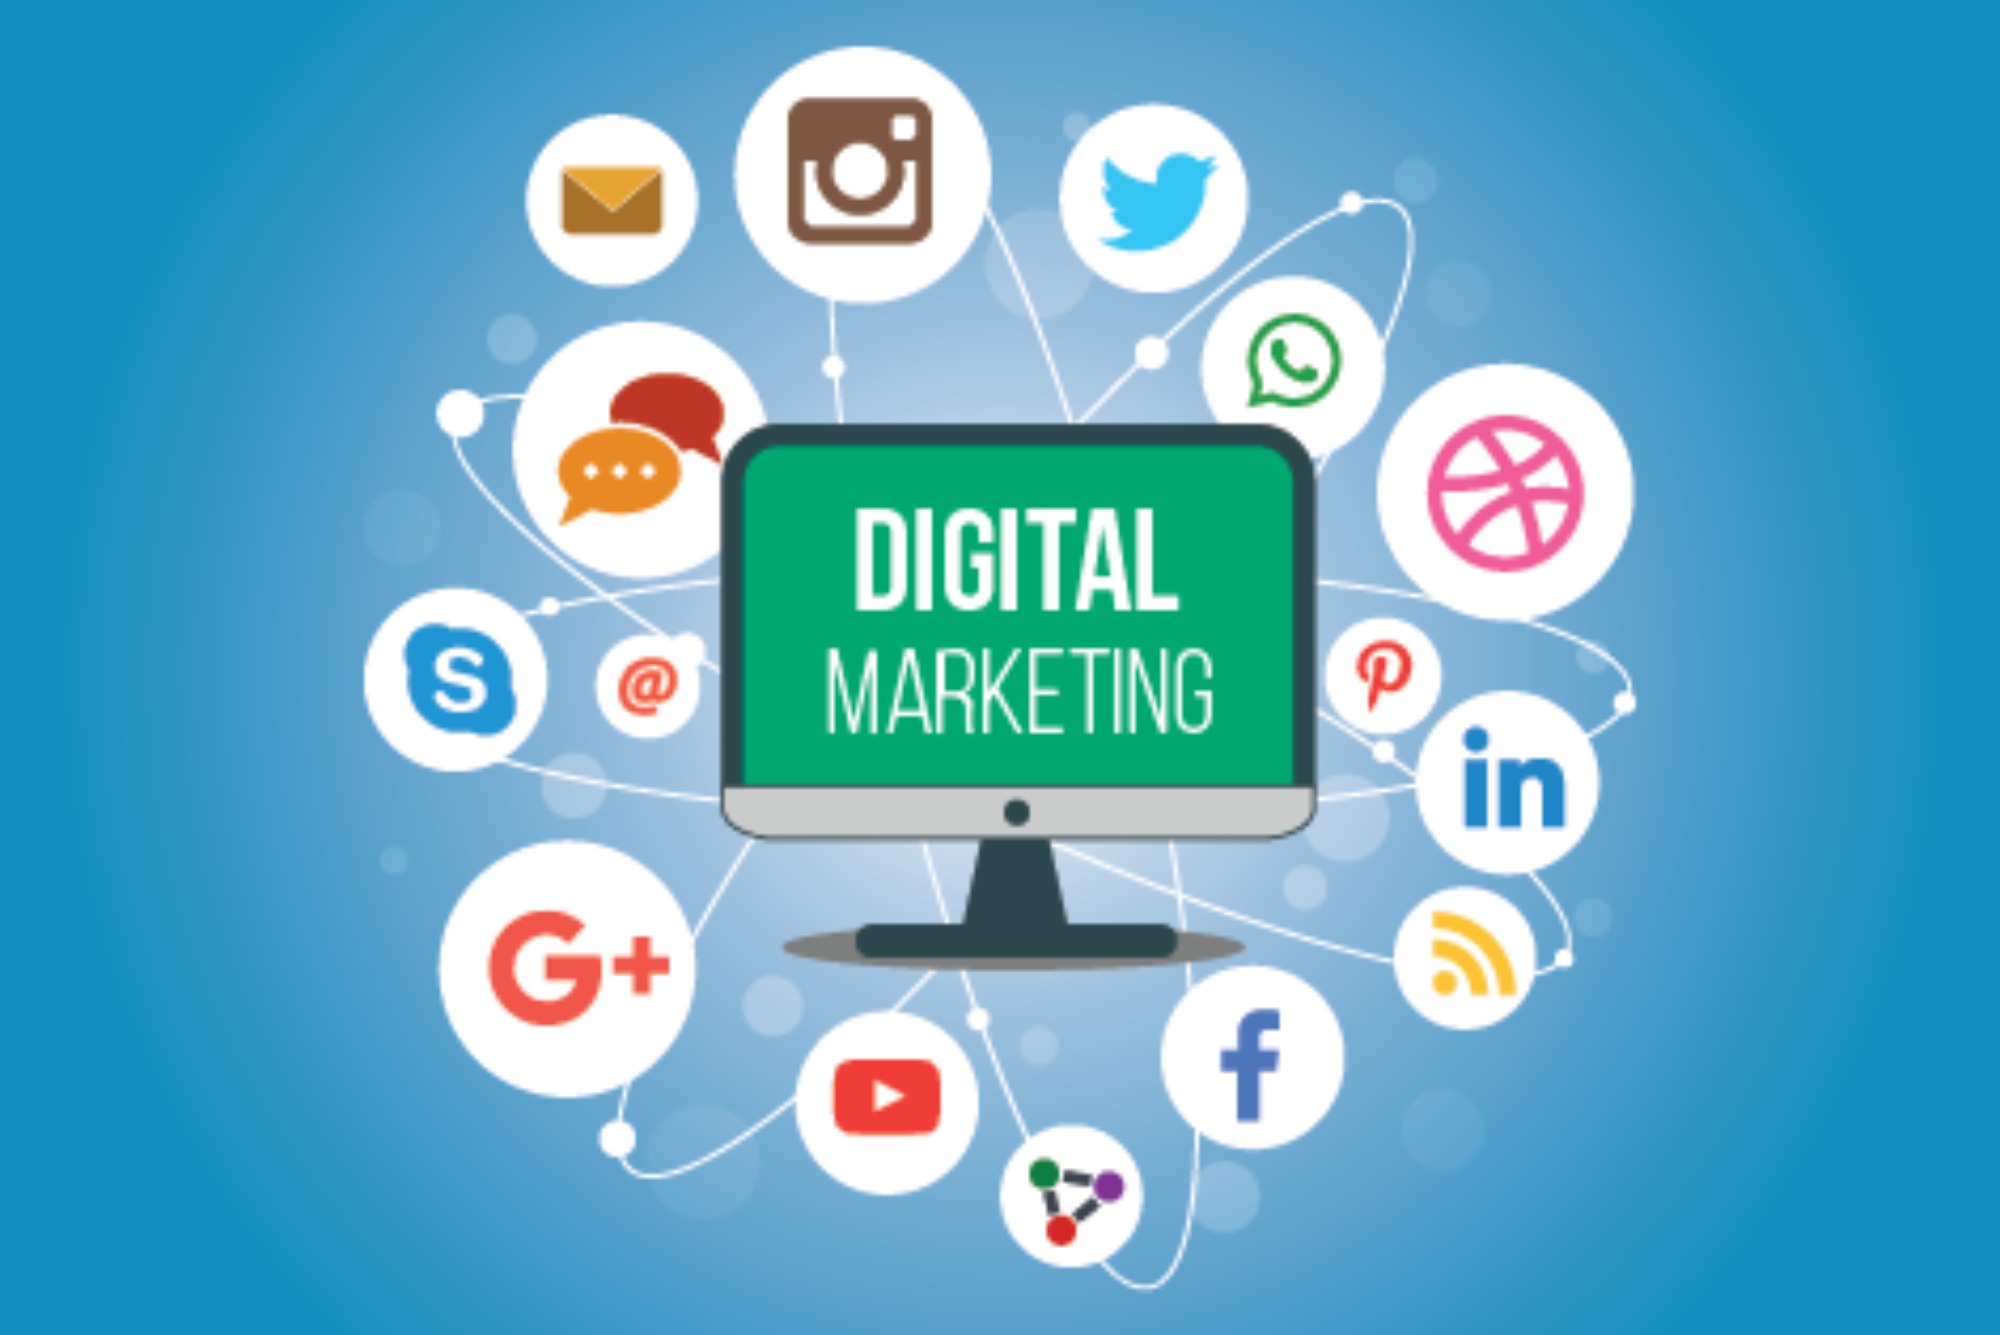 What Are Digital Marketing Channels (2)